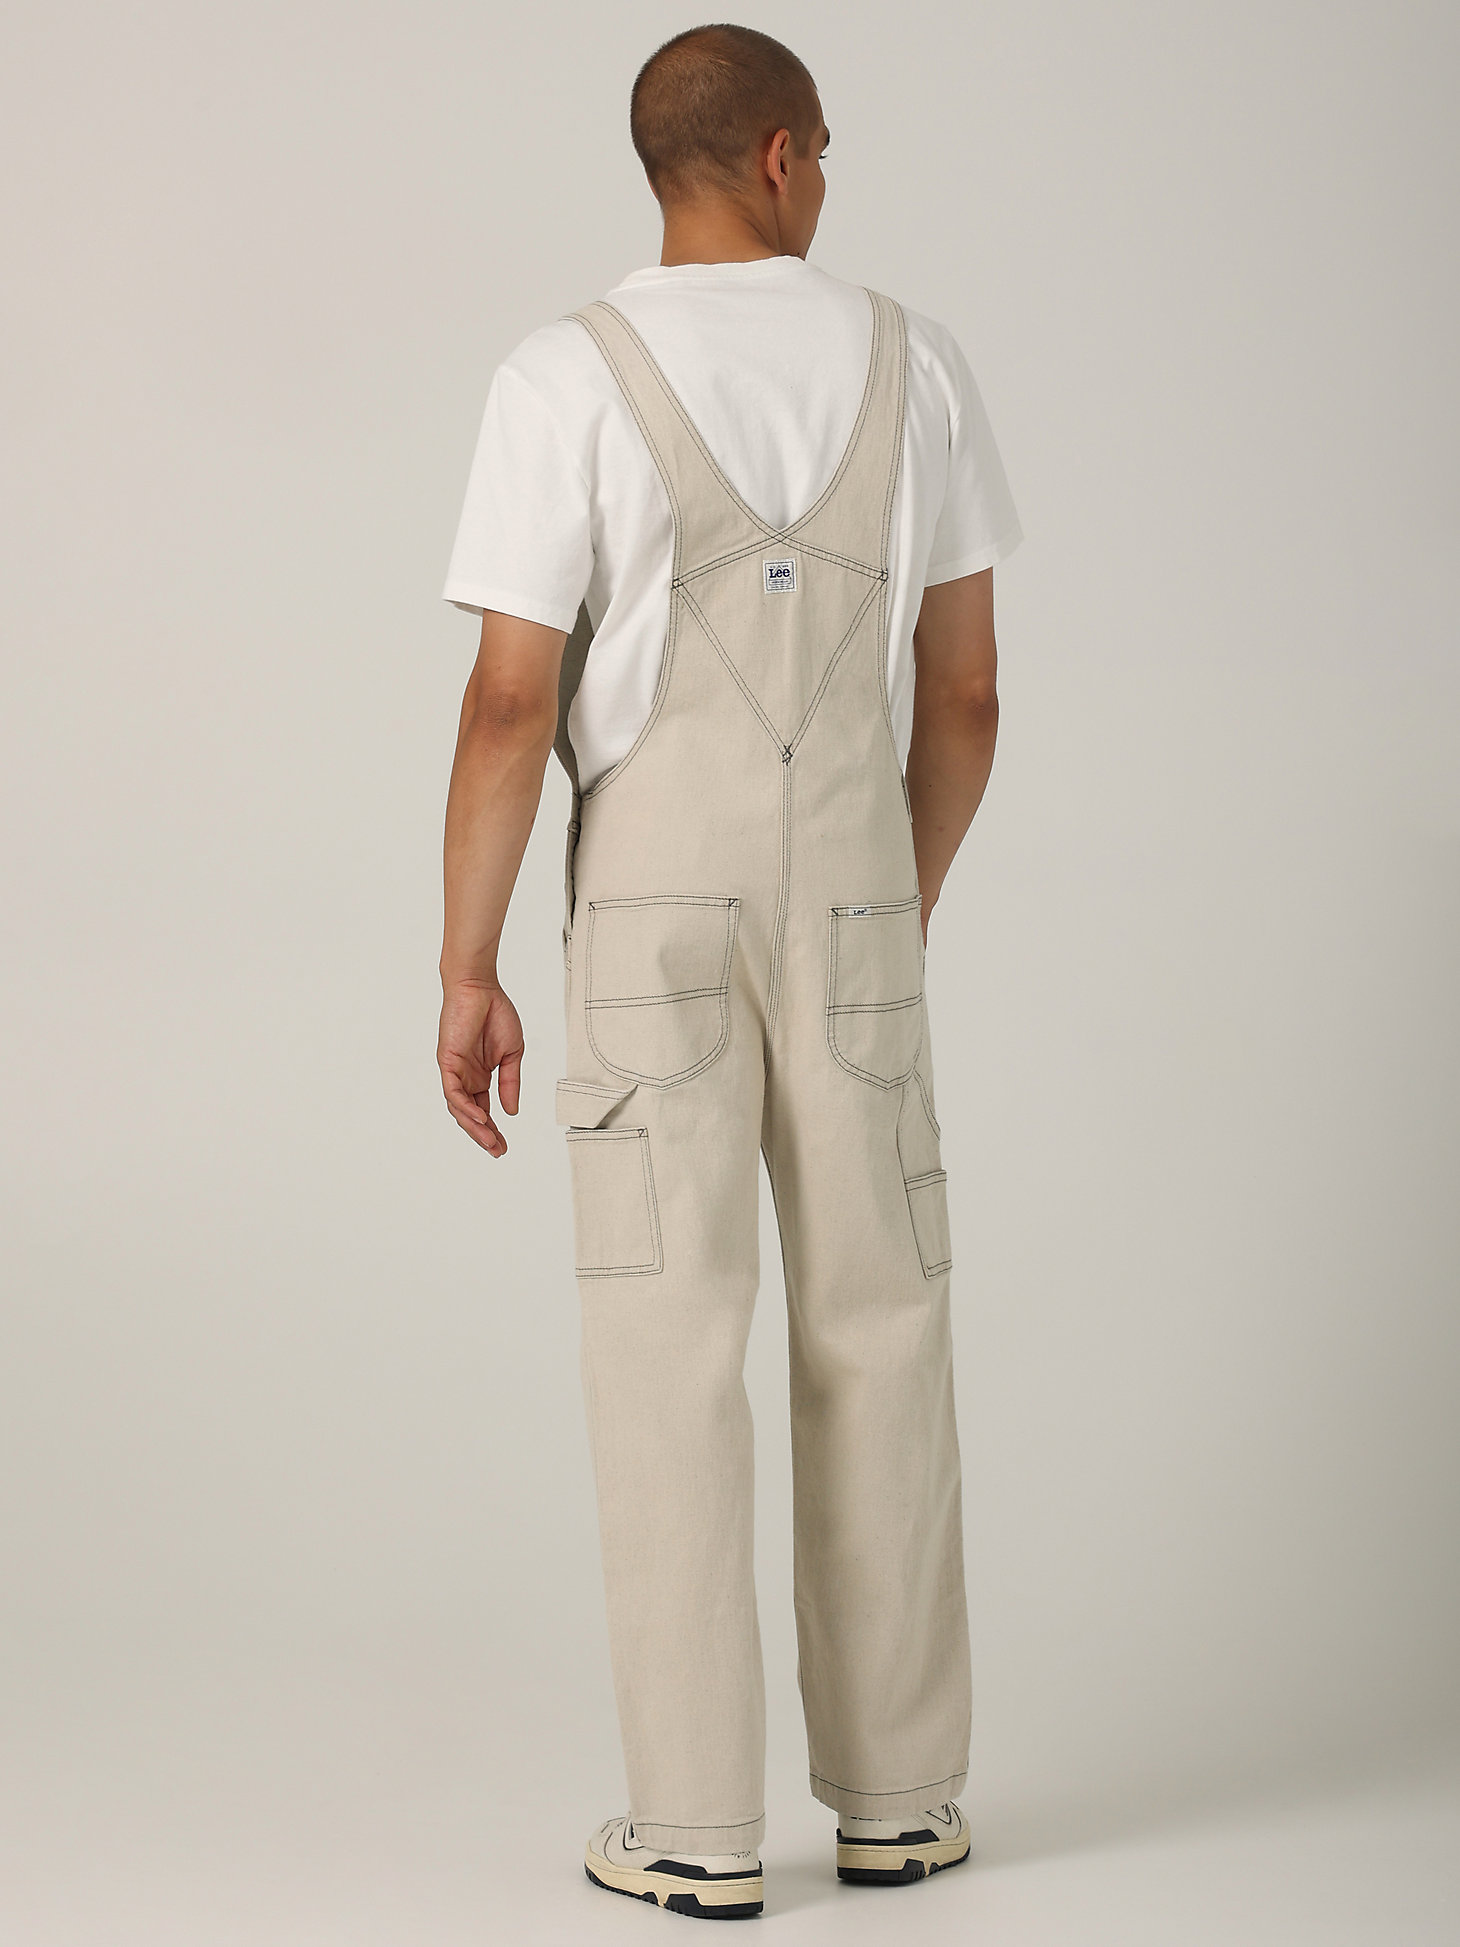 Men's Heritage Relaxed Fit Bib Overall in Rinse alternative view 1